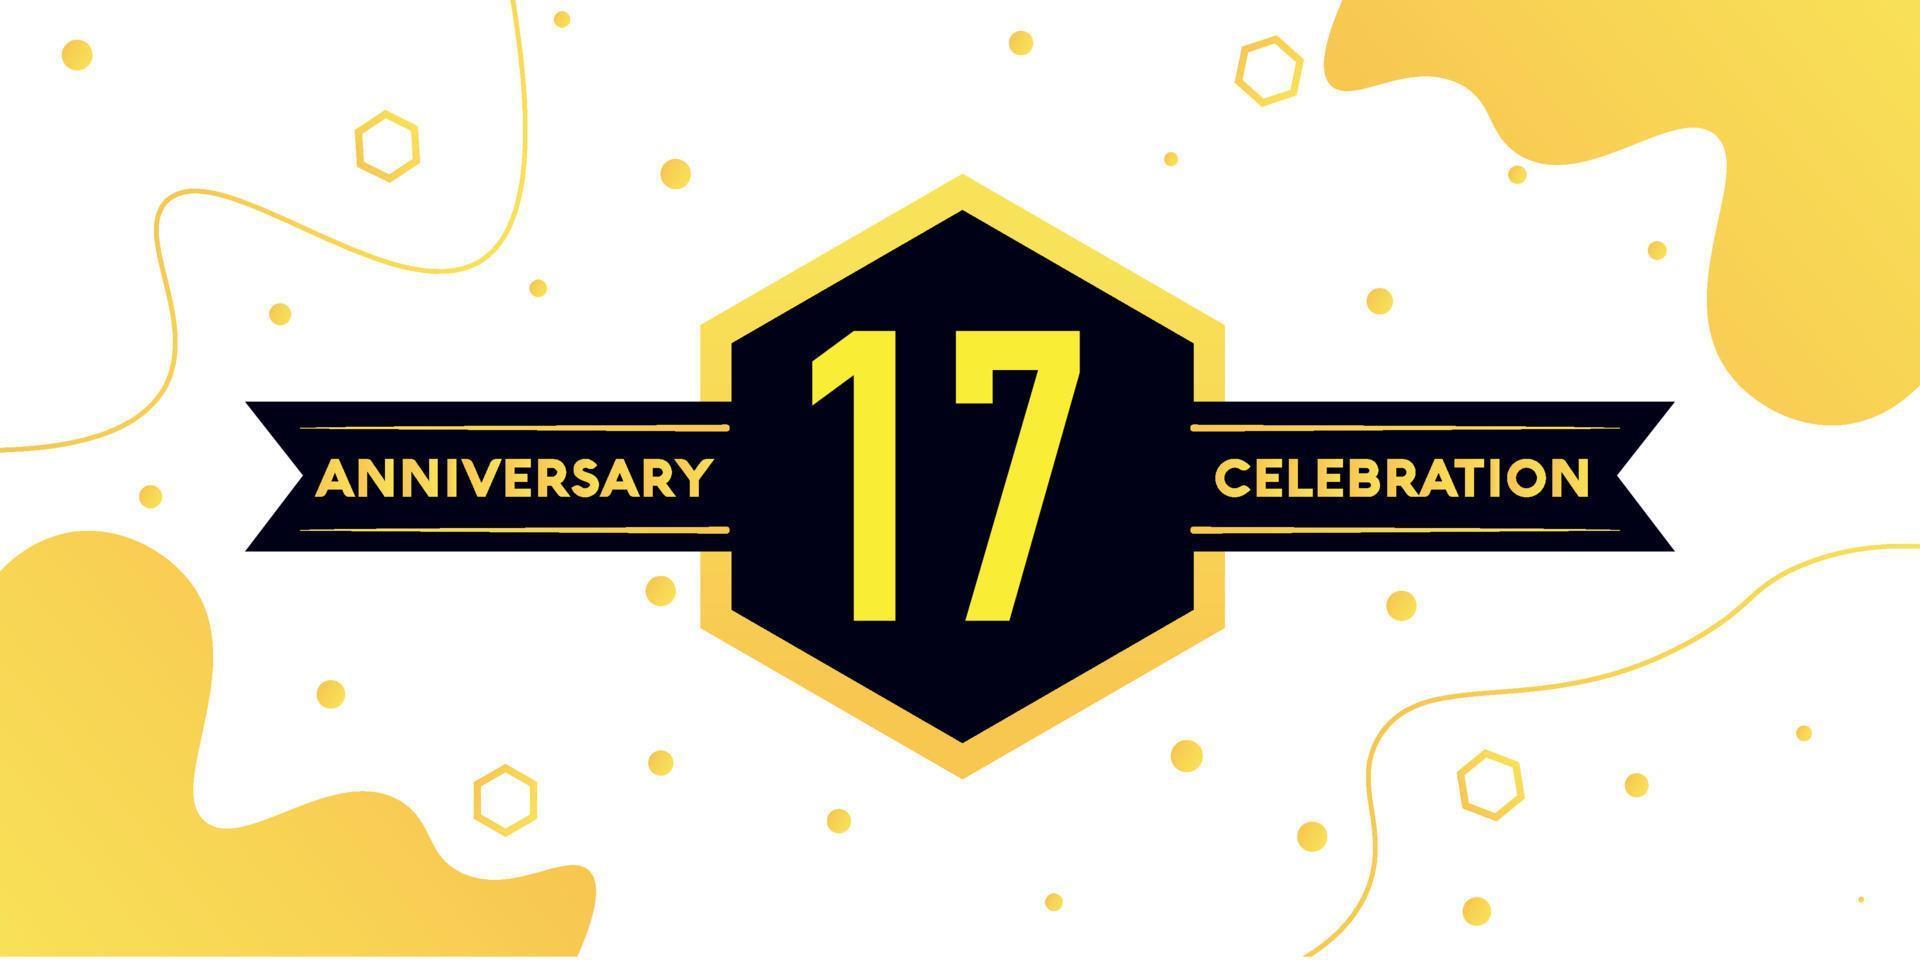 17 years anniversary logo vector design with yellow geometric shape with black and abstract design on white background template